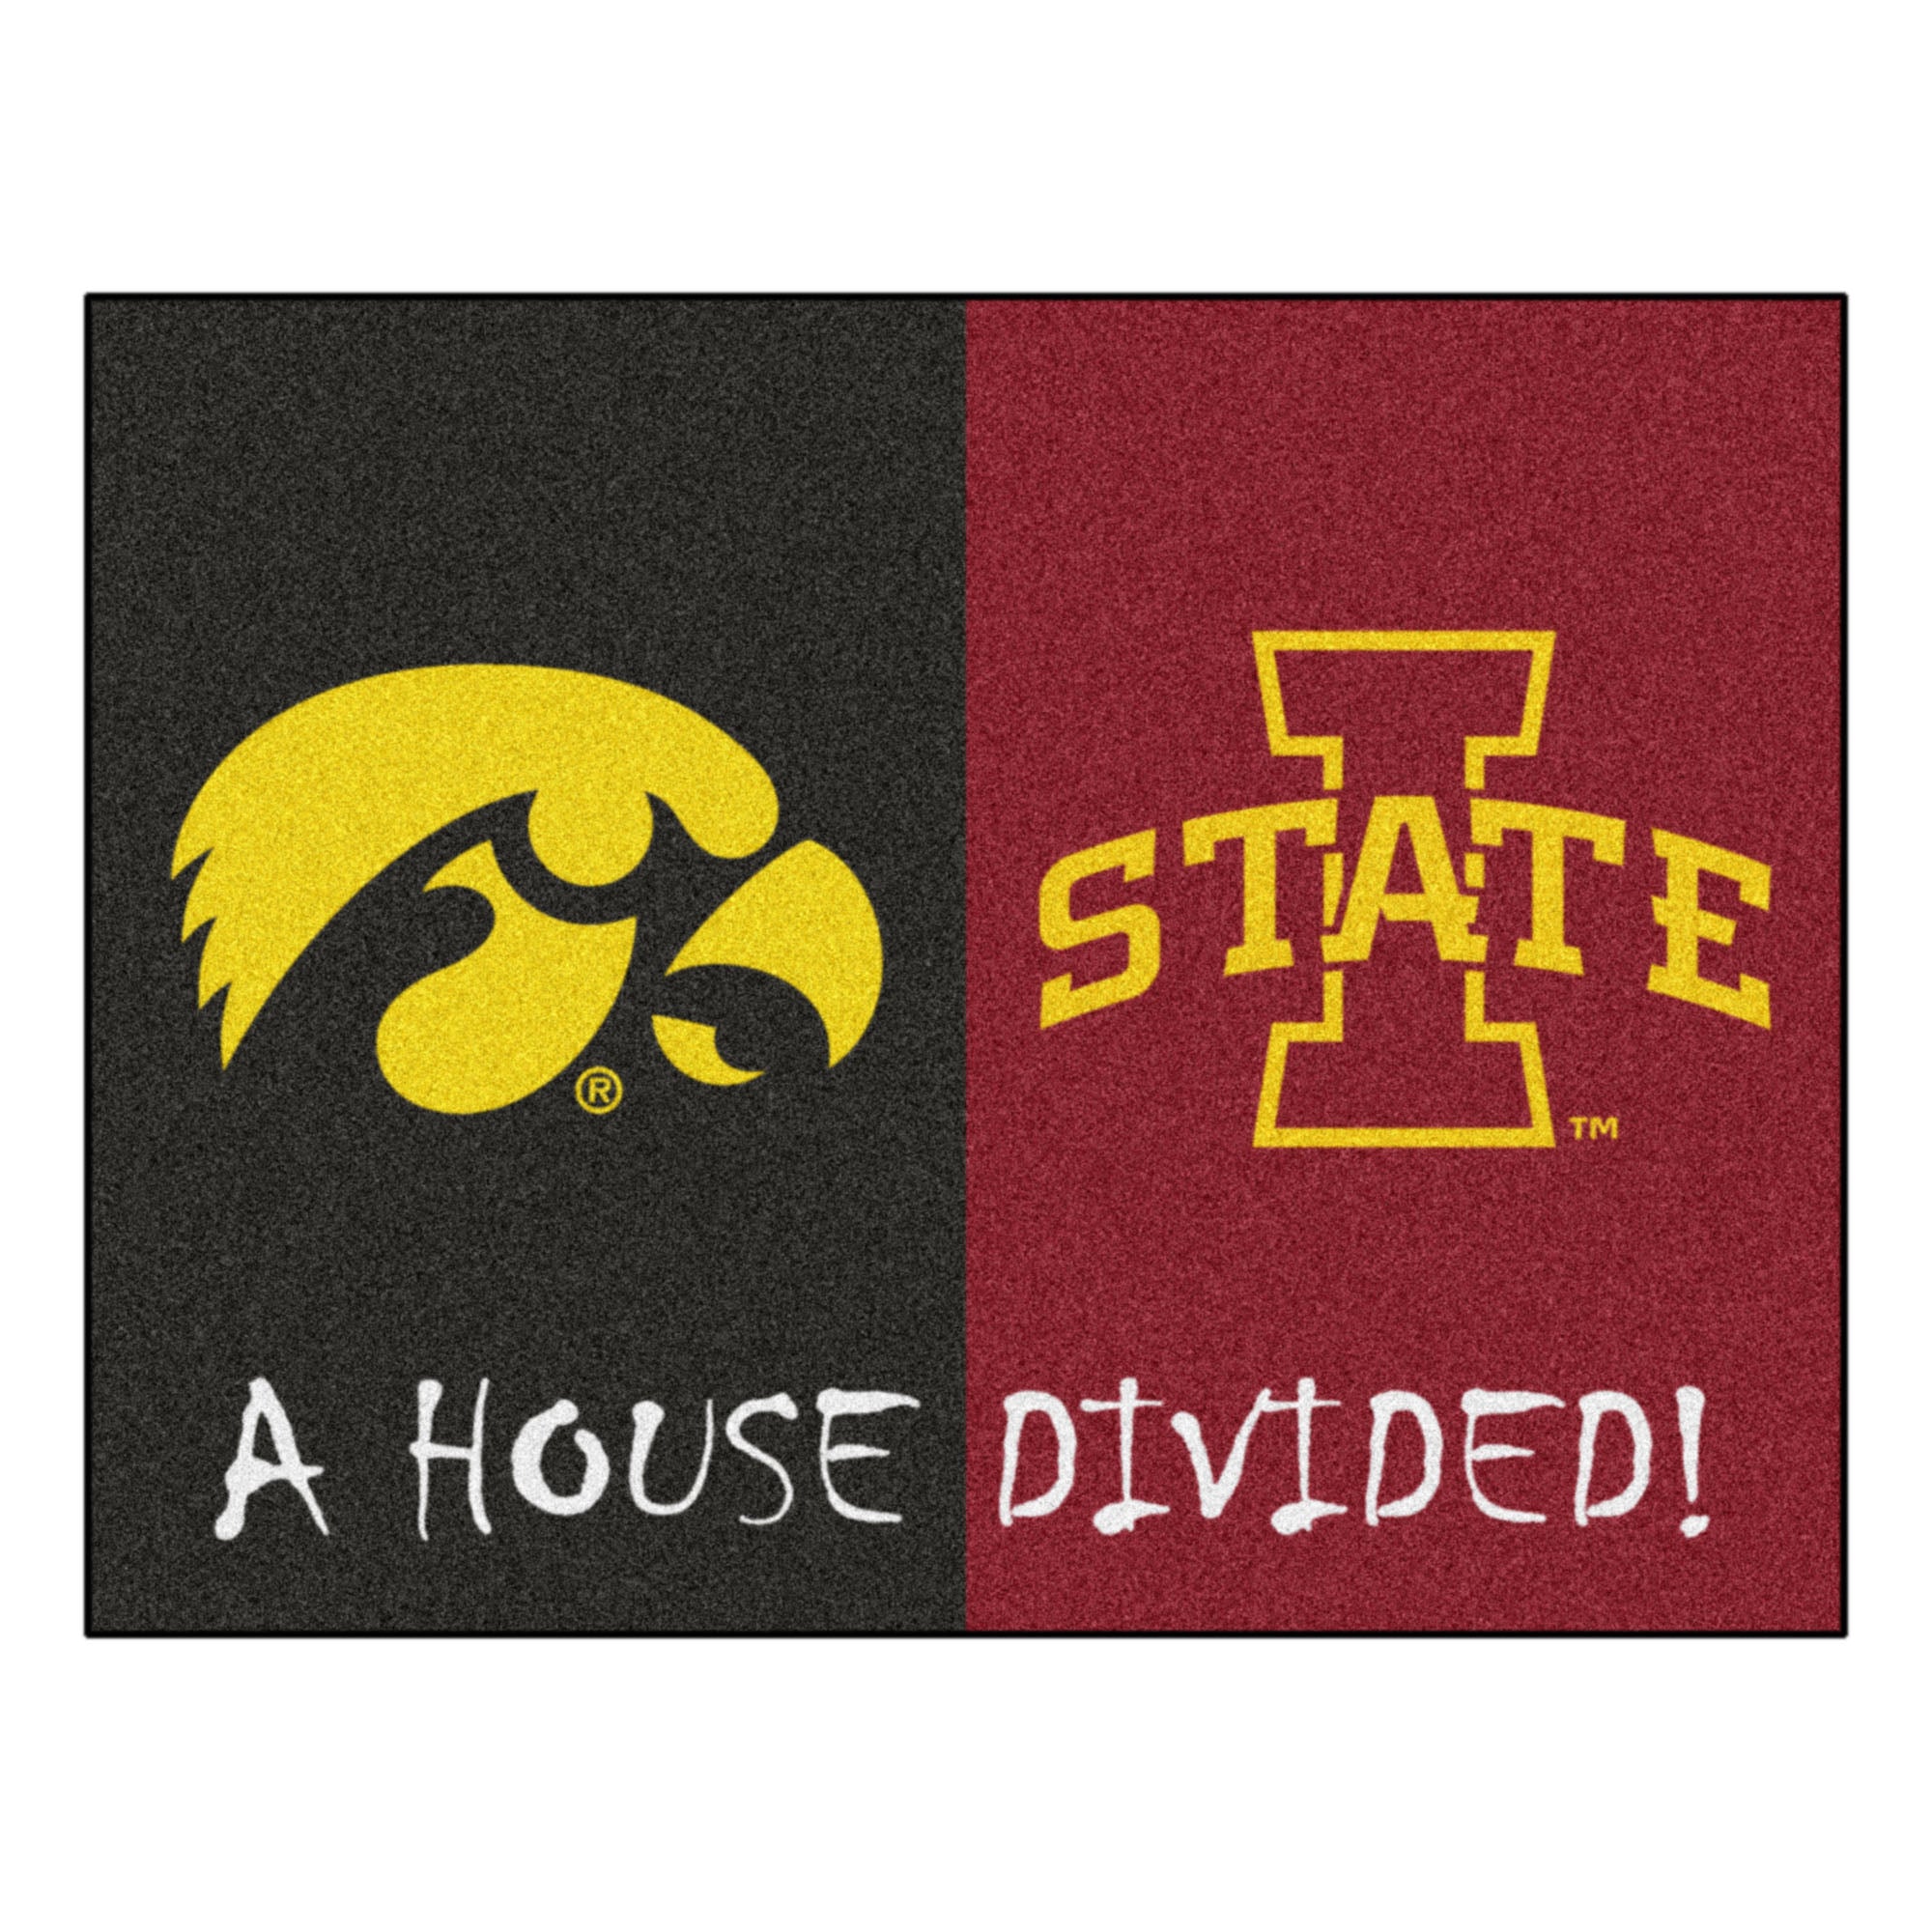 House Divided - Iowa / Iowa State House Divided Mat